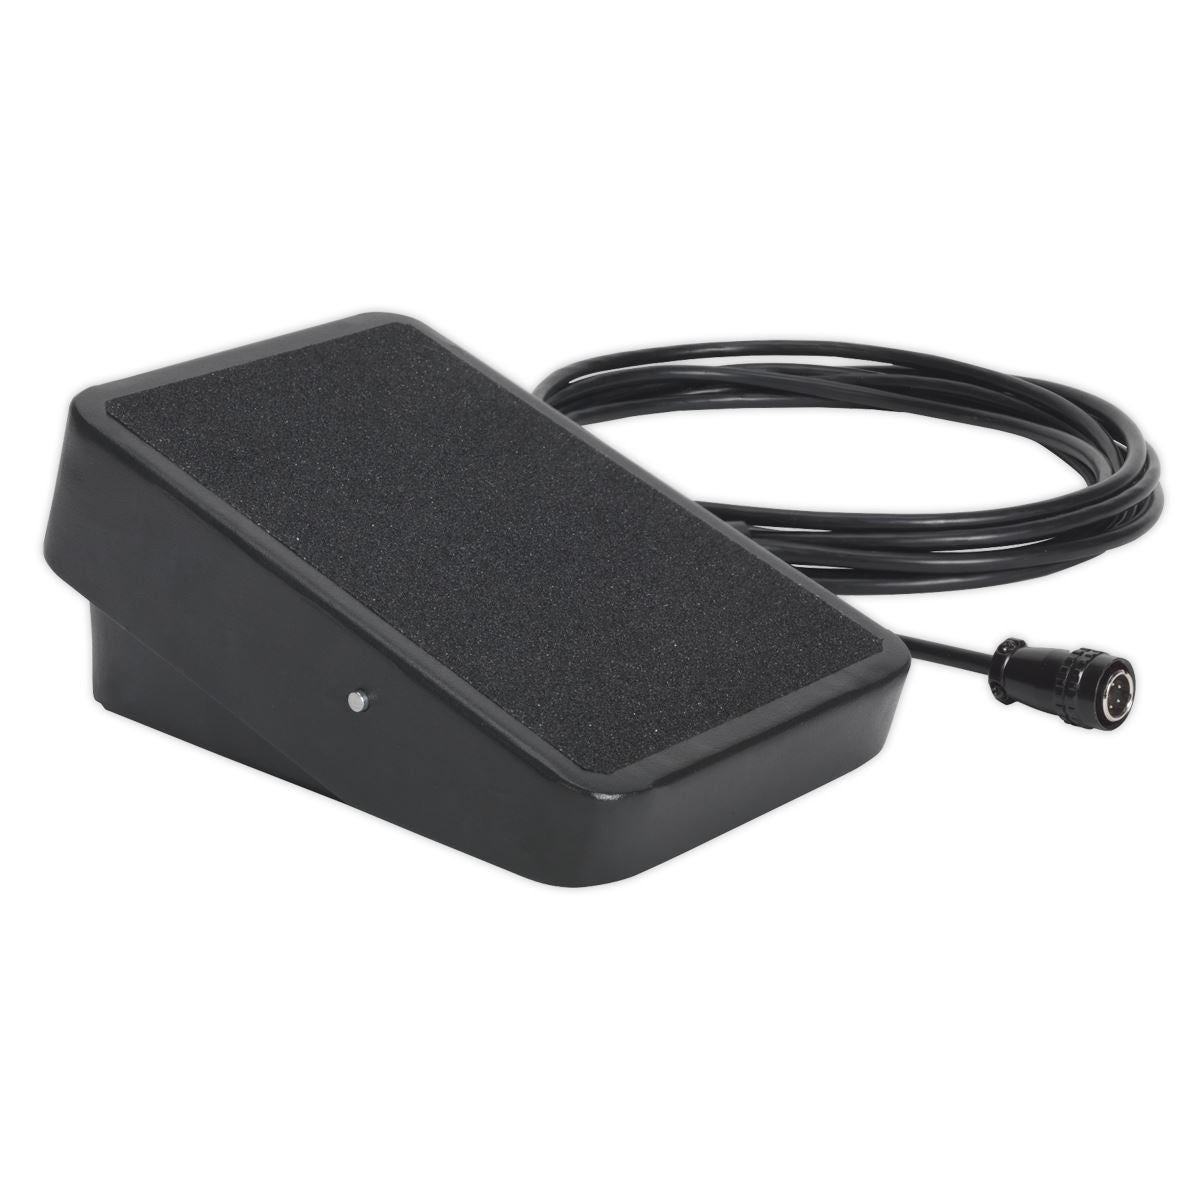 Sealey Foot Pedal Power Control for TIG200HFACDC